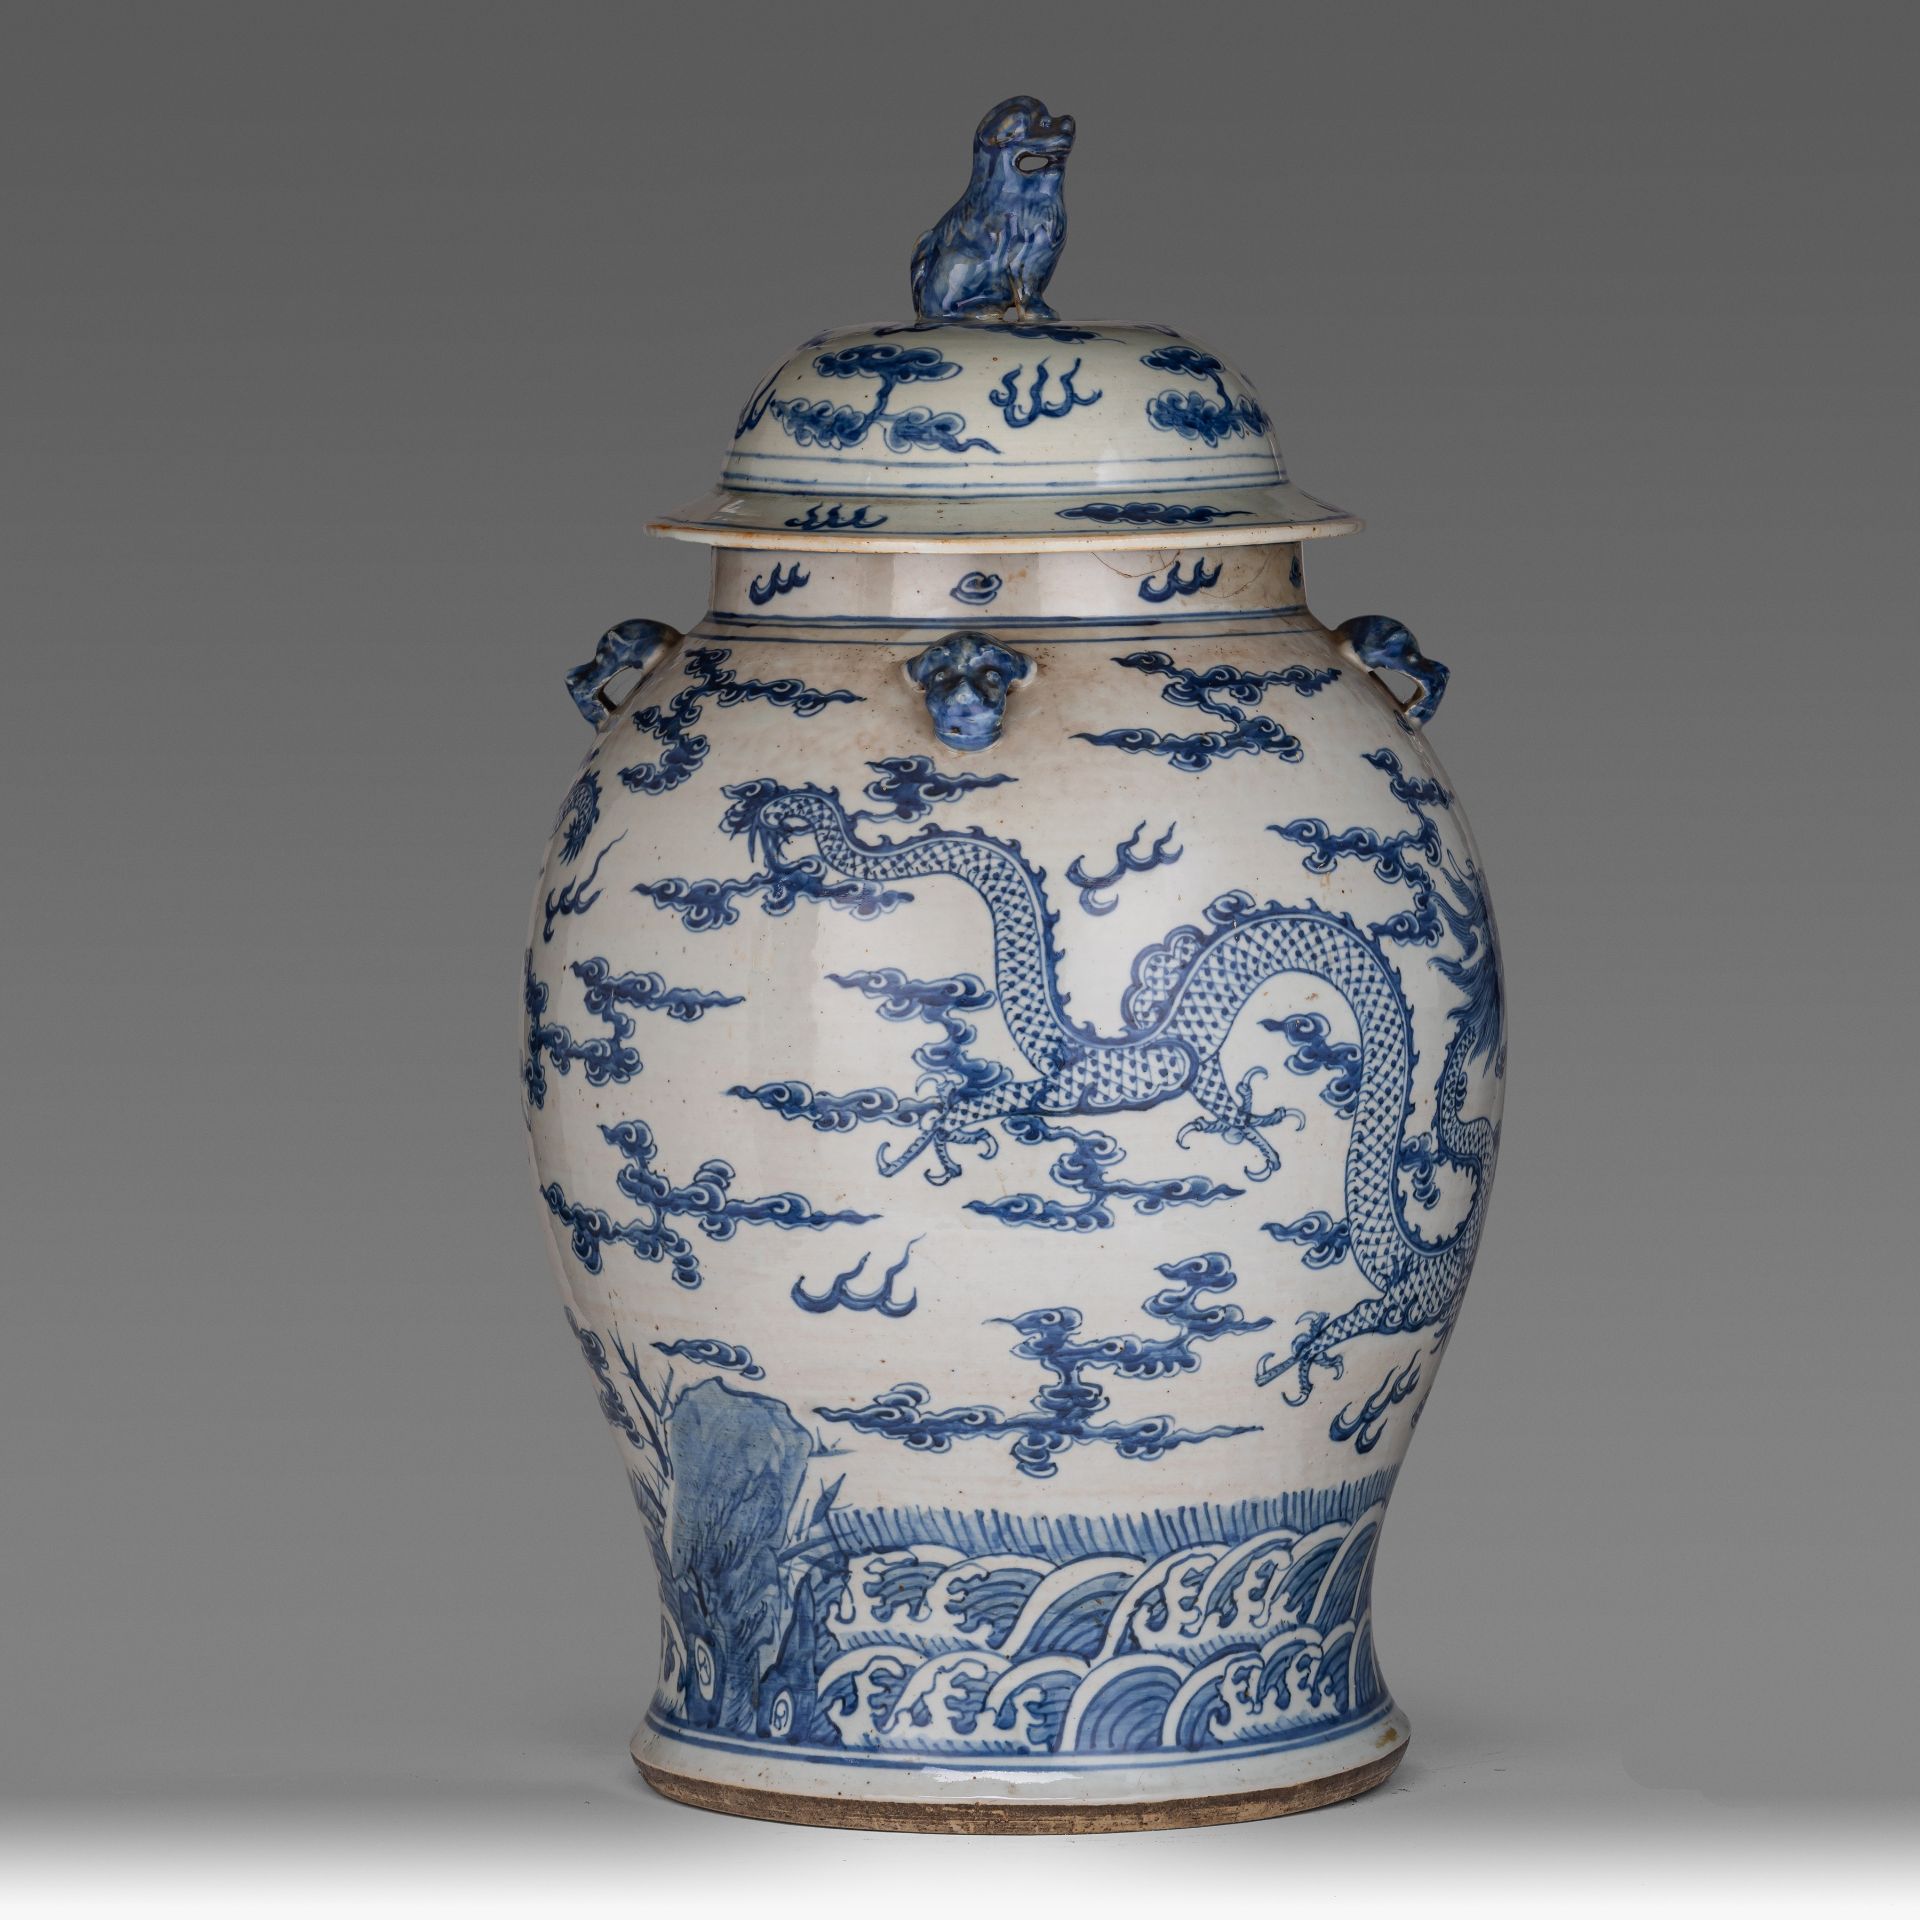 A pair of Chinese blue and white 'Dragon' covered vases, 19thC, H 64 cm - Image 10 of 18